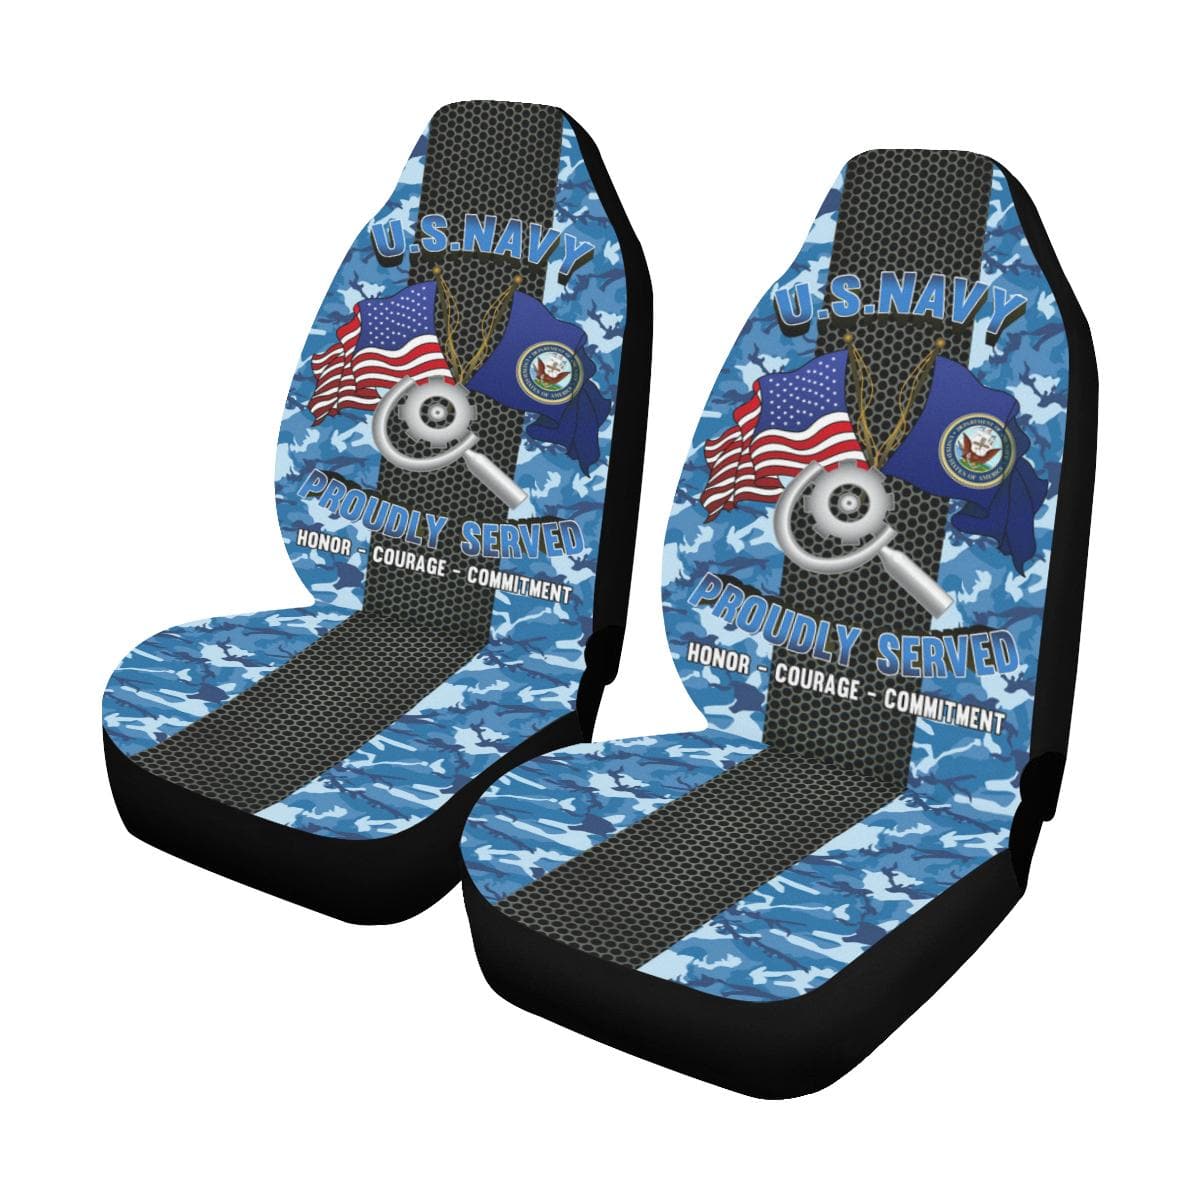 U.S Navy Machinery repairman Navy MR Car Seat Covers (Set of 2)-SeatCovers-Navy-Rate-Veterans Nation